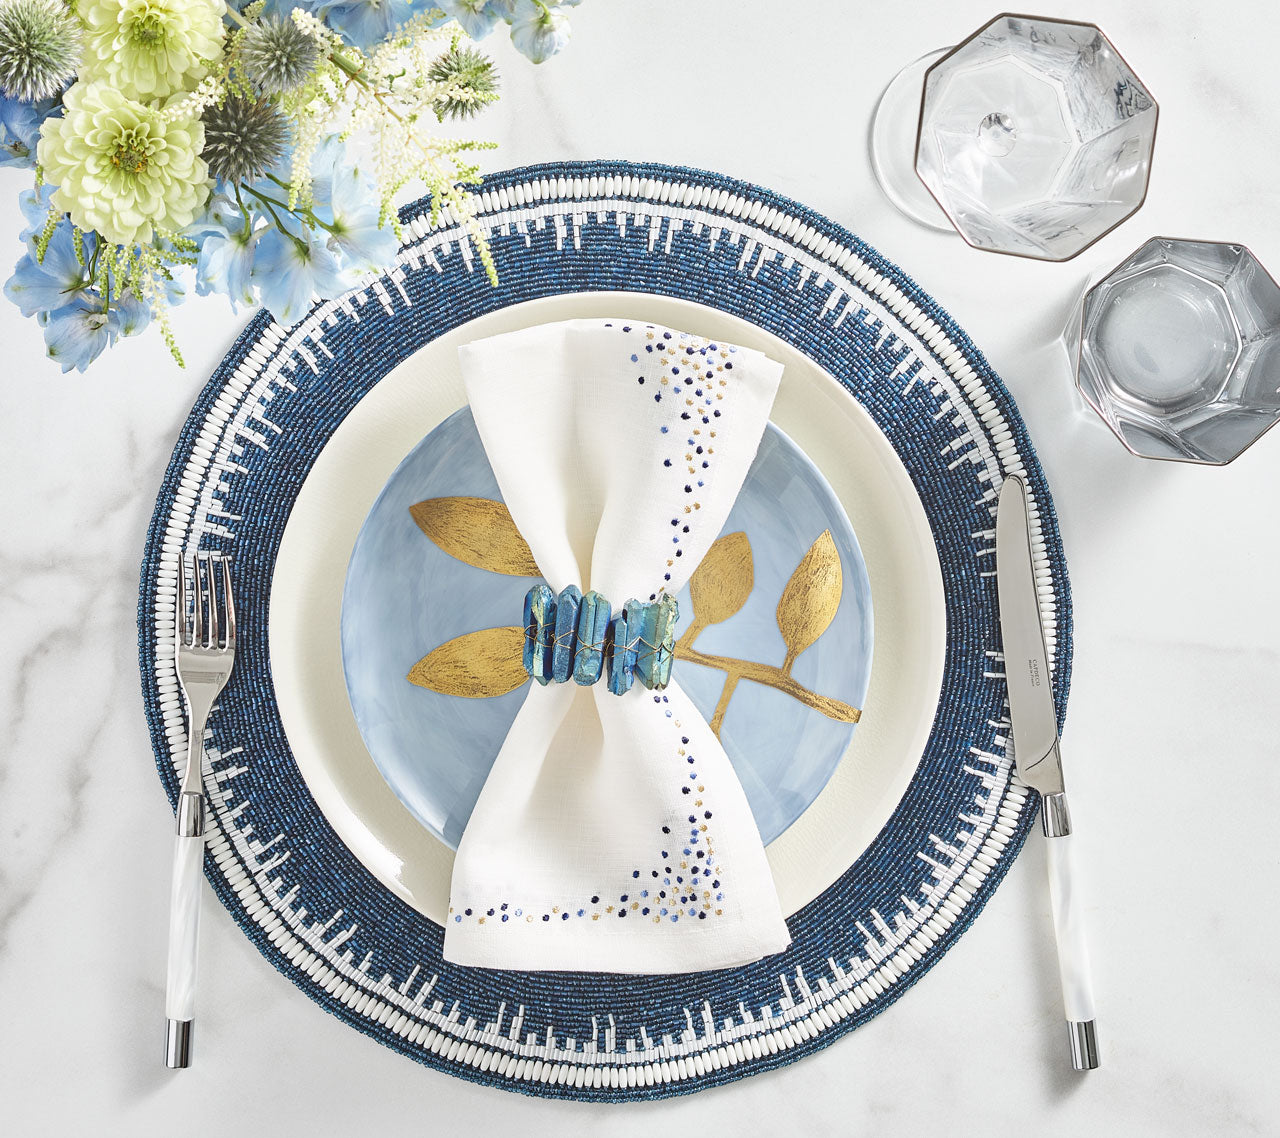 Place setting with a blue beaded placemat, blue plate and a white Pin Dot Napkin with a navy border